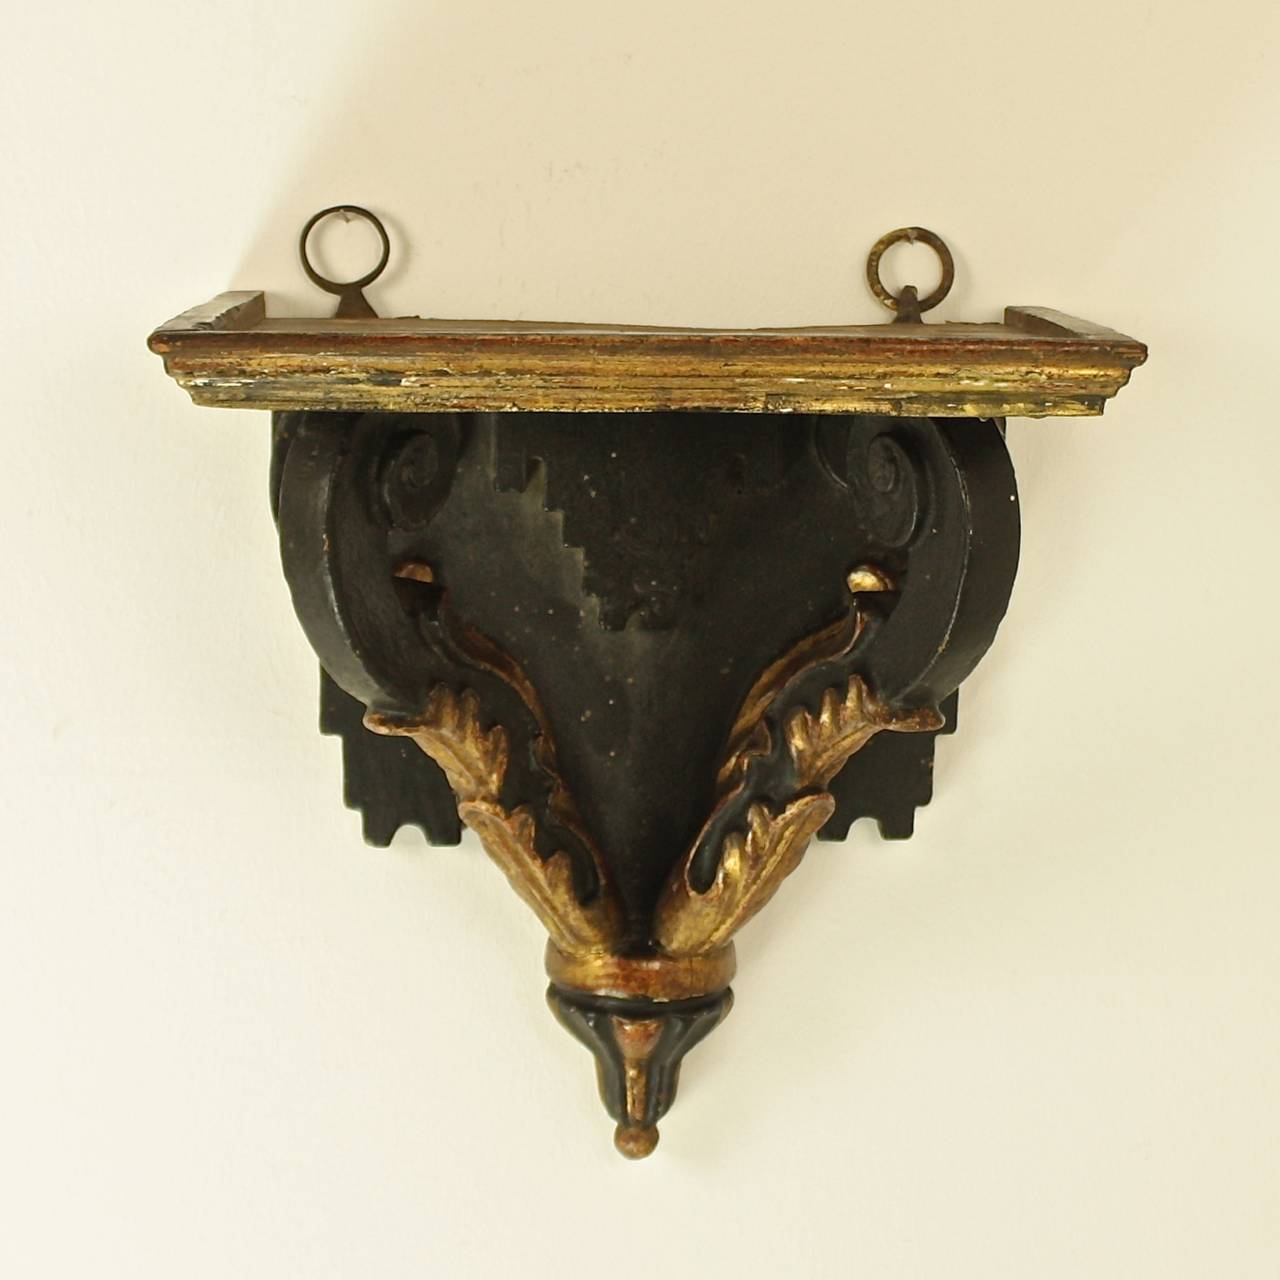 French Provencal wall bracket from about 1720 with a rectangular shaped top above scrolled and acanthus leave decorated supports terminating in a gadrooned shaped finial.